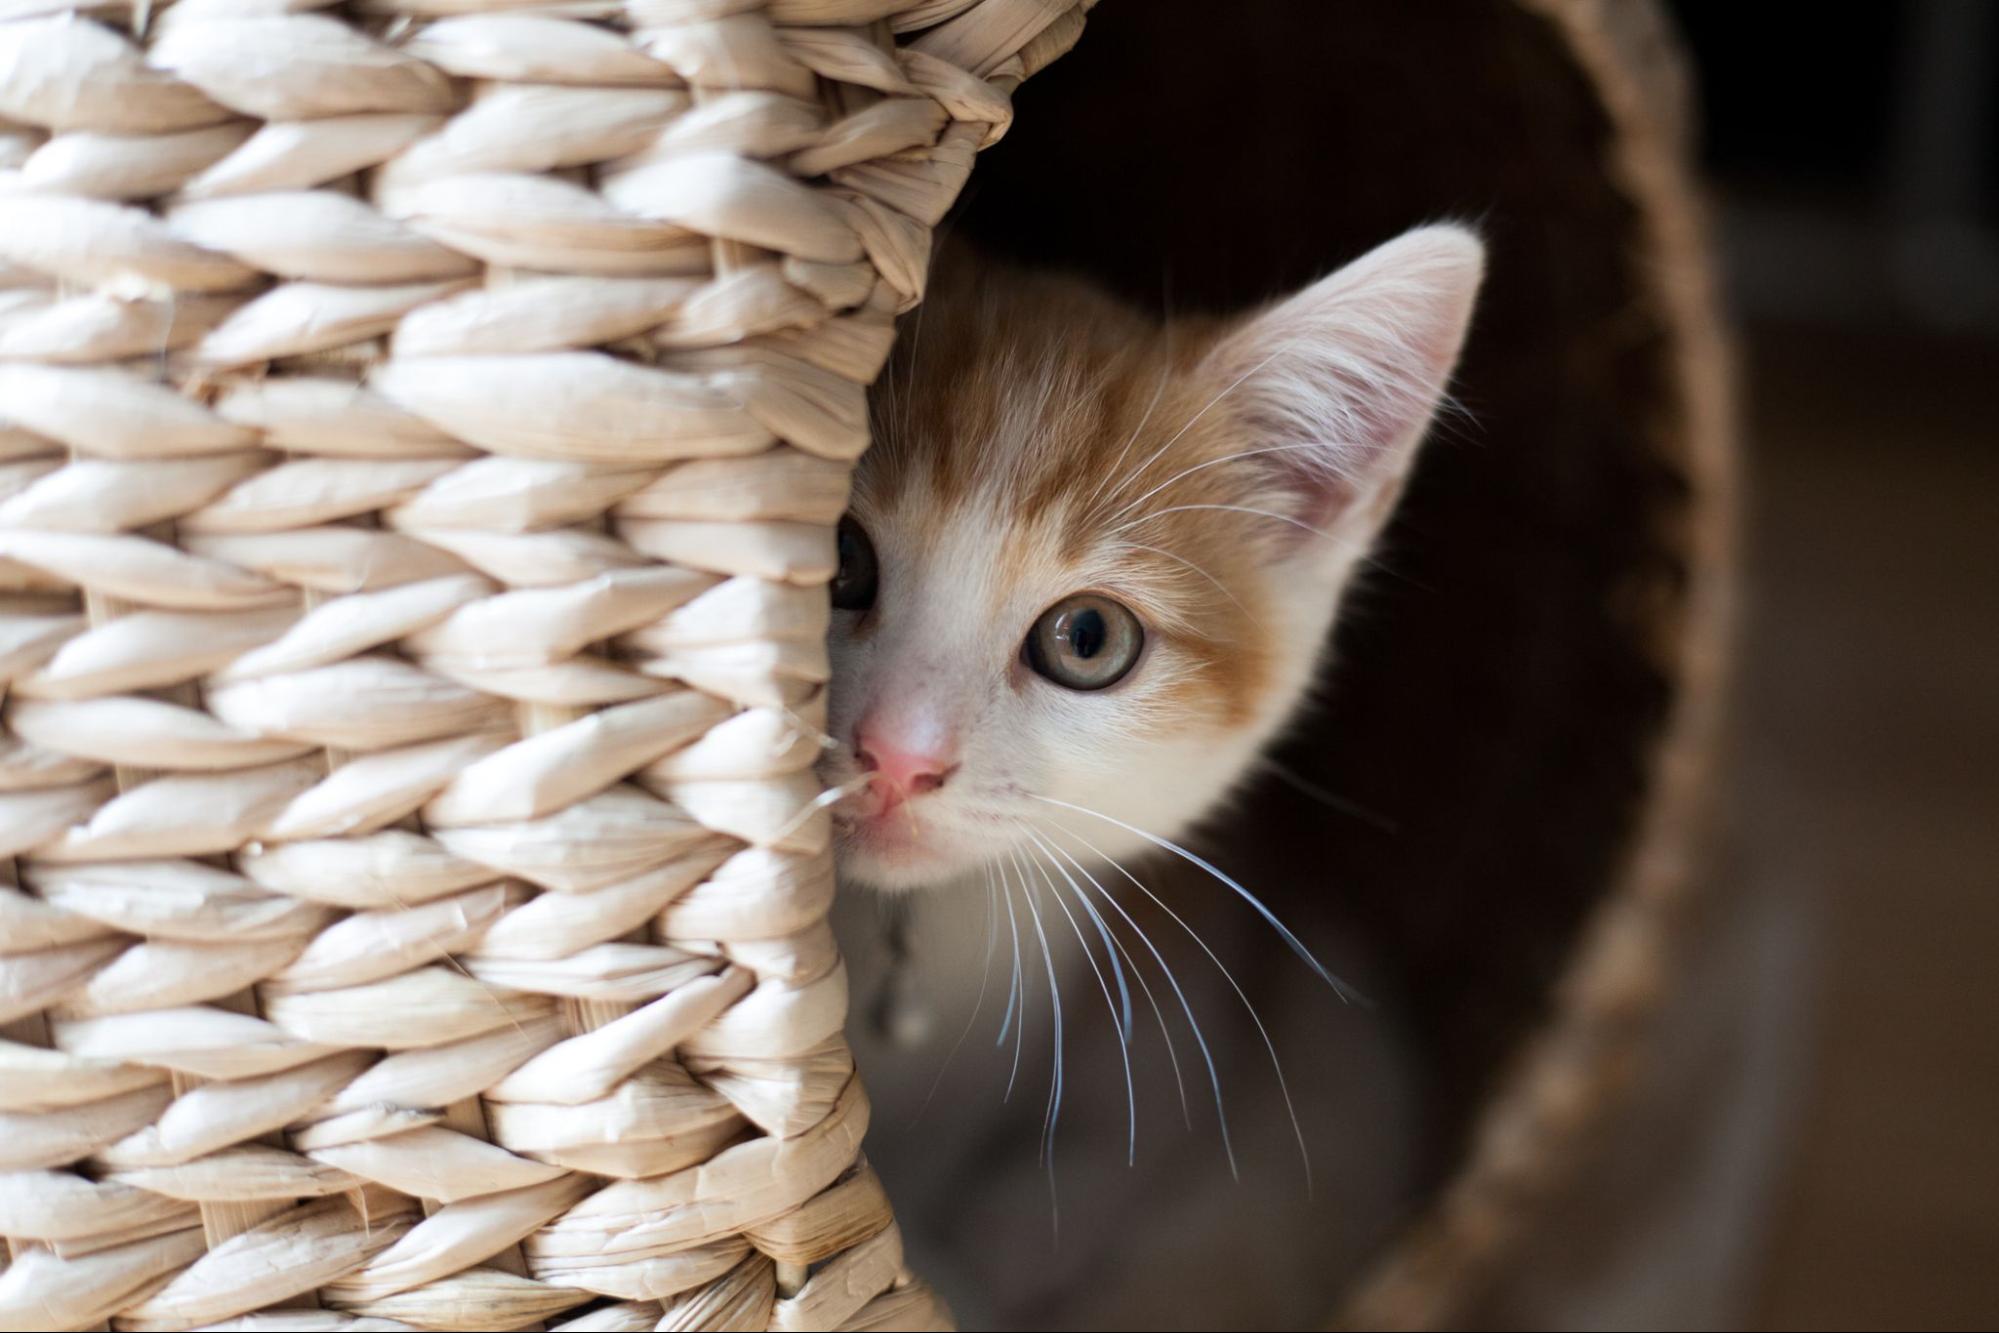 A small kitty looks out from inside a basket